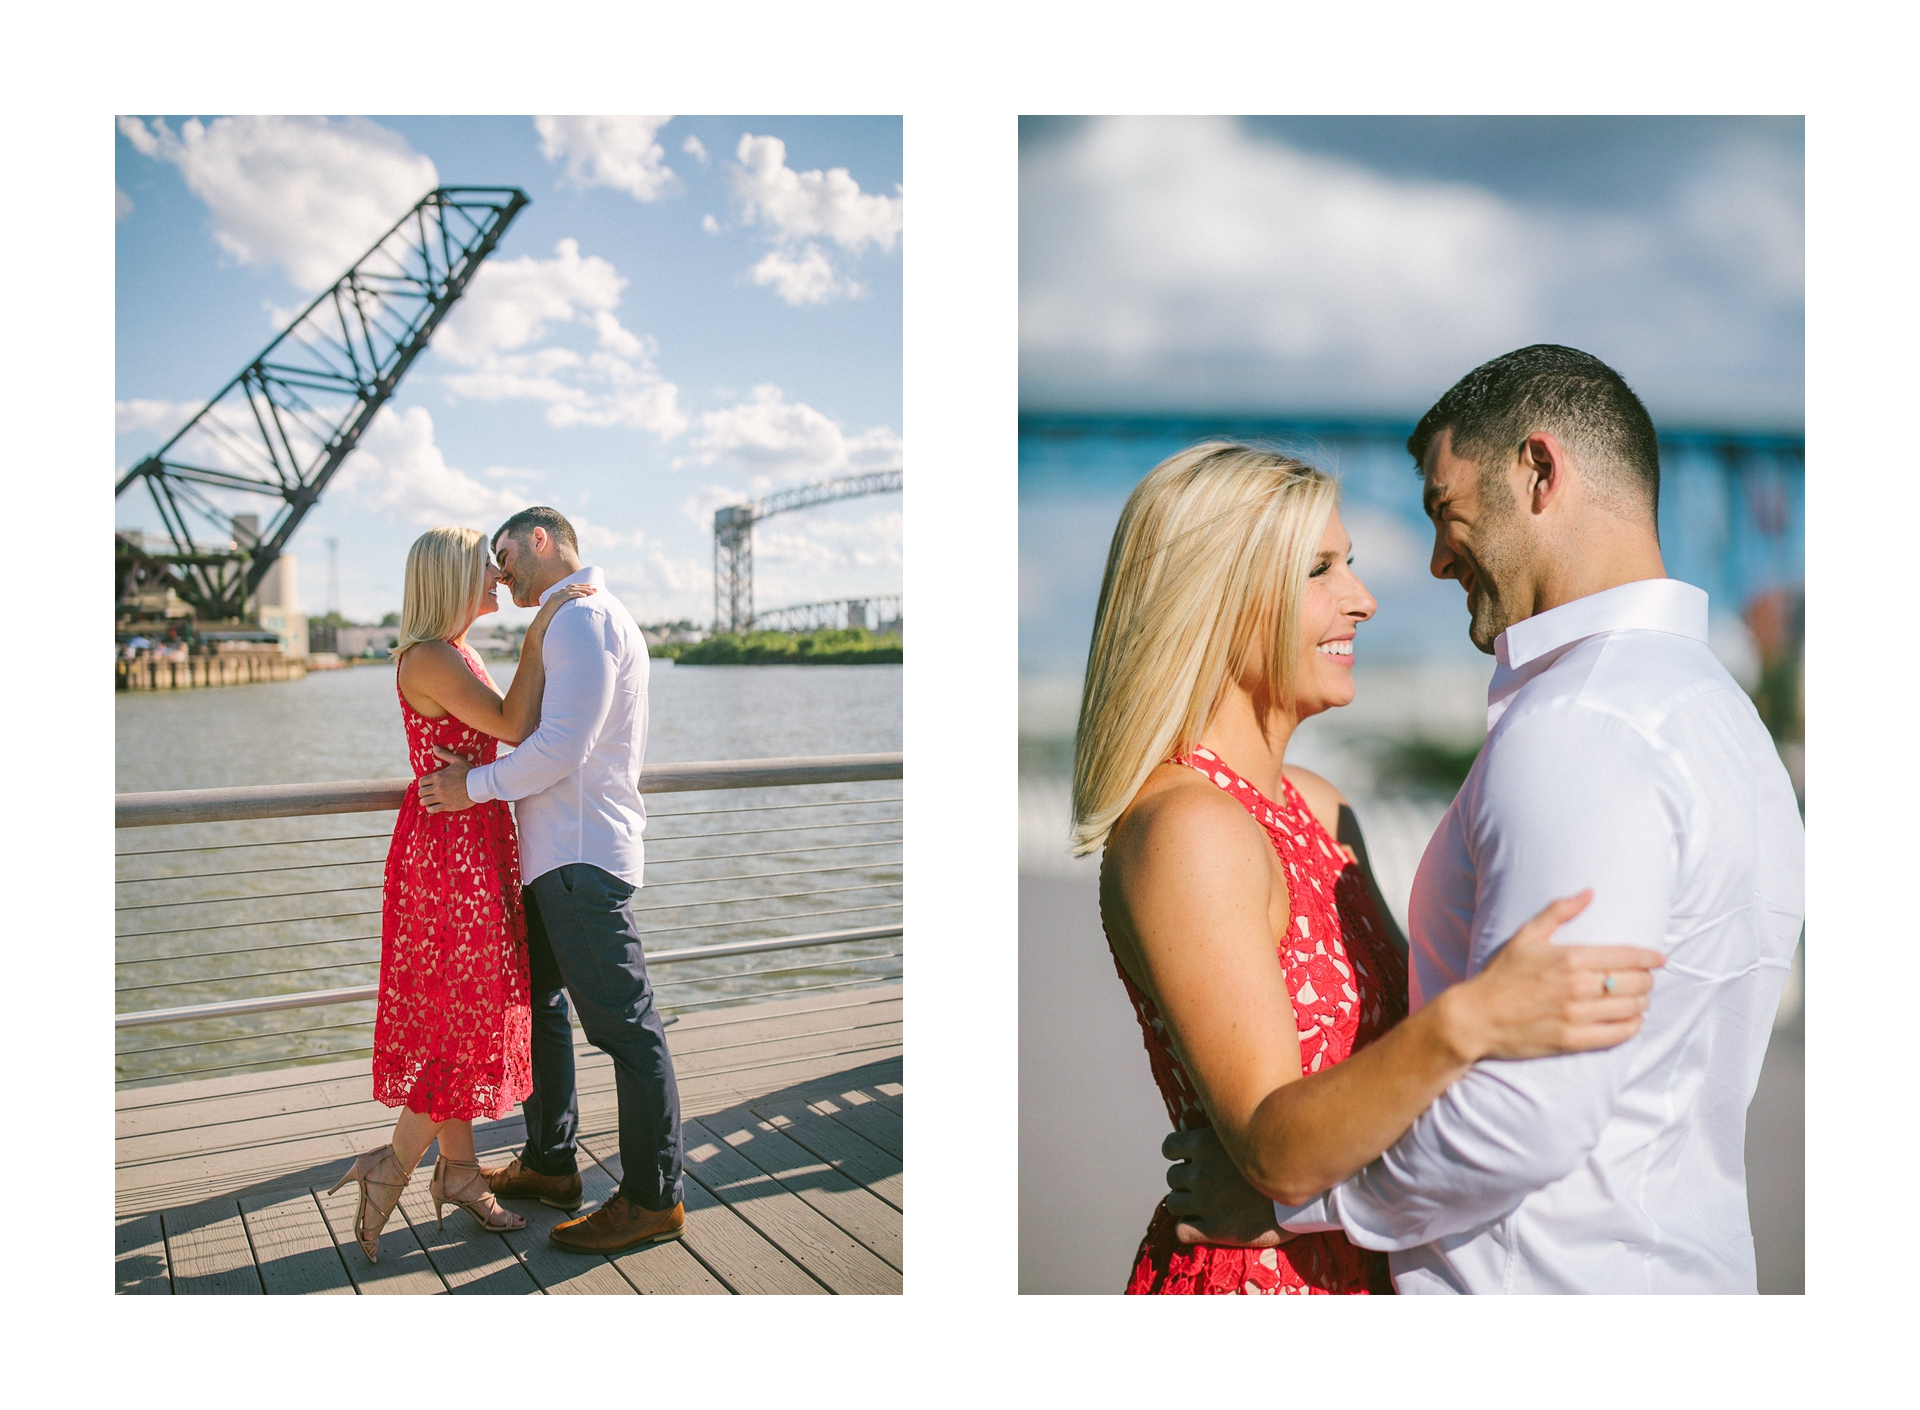 Sara Shookman Angelo DiFranco Engagement photos in cleveland by too much awesomeness photography 2.jpg